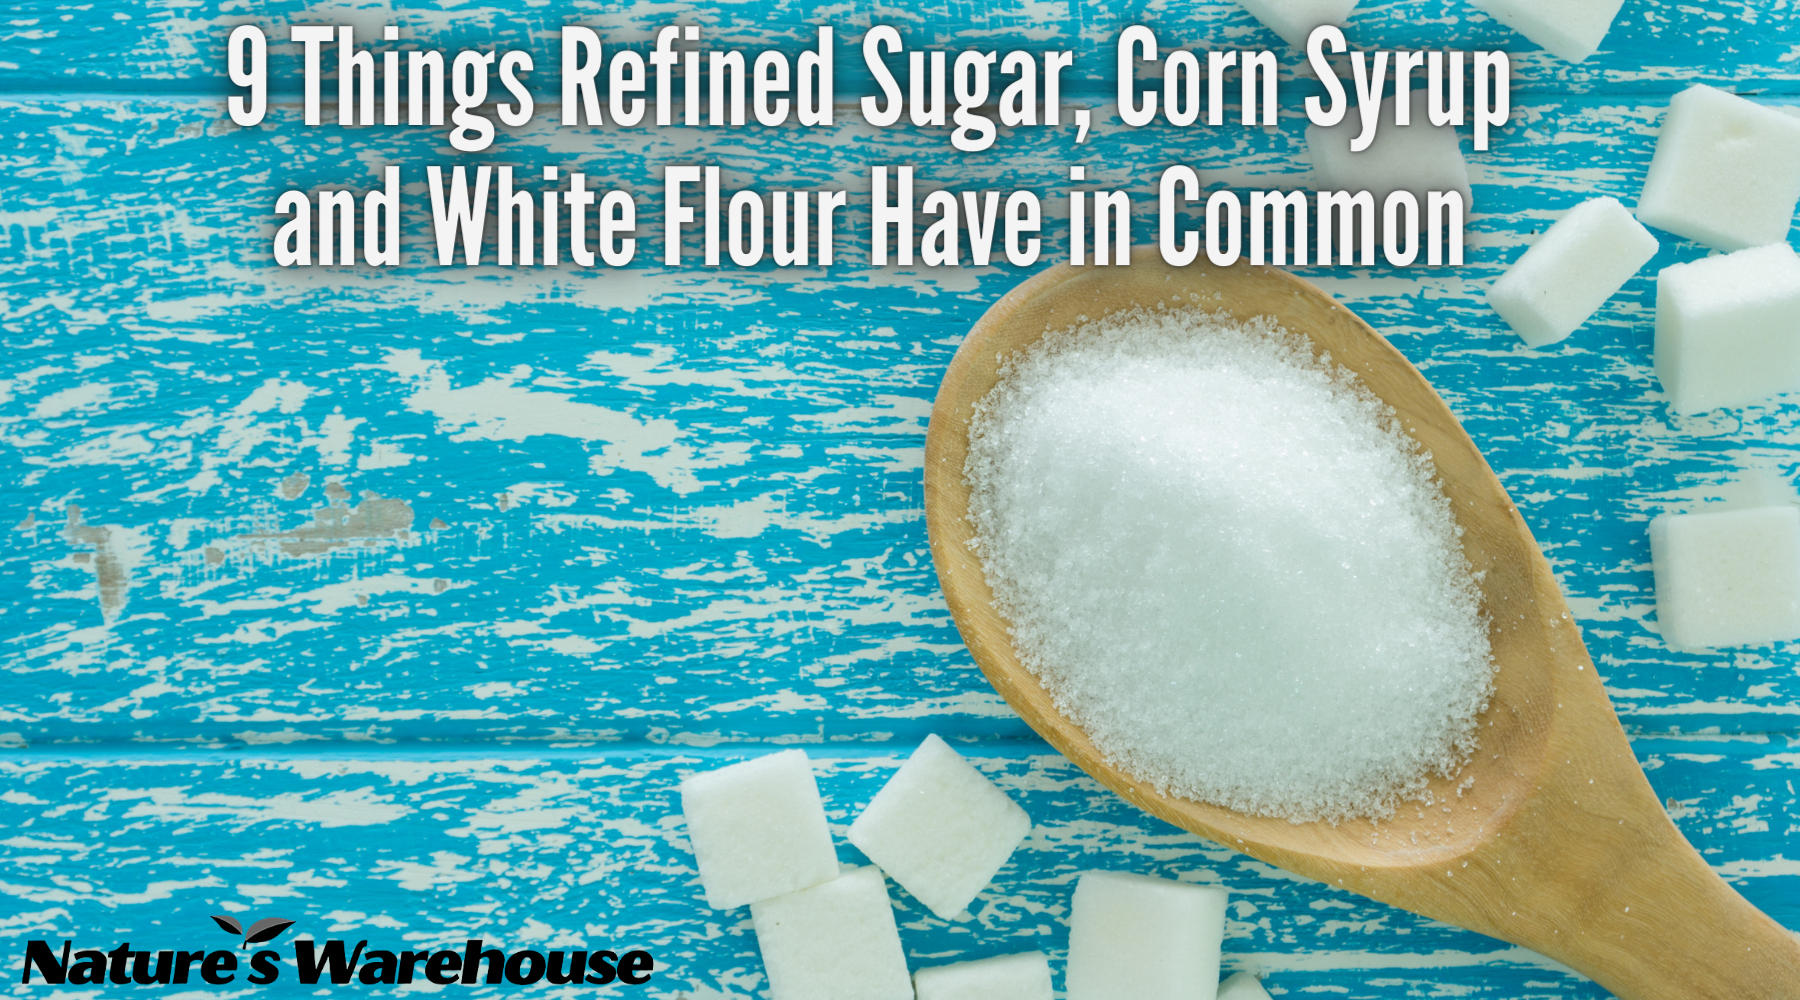 9 Things Refined Sugar, Corn Syrup and White Flour Have in Common